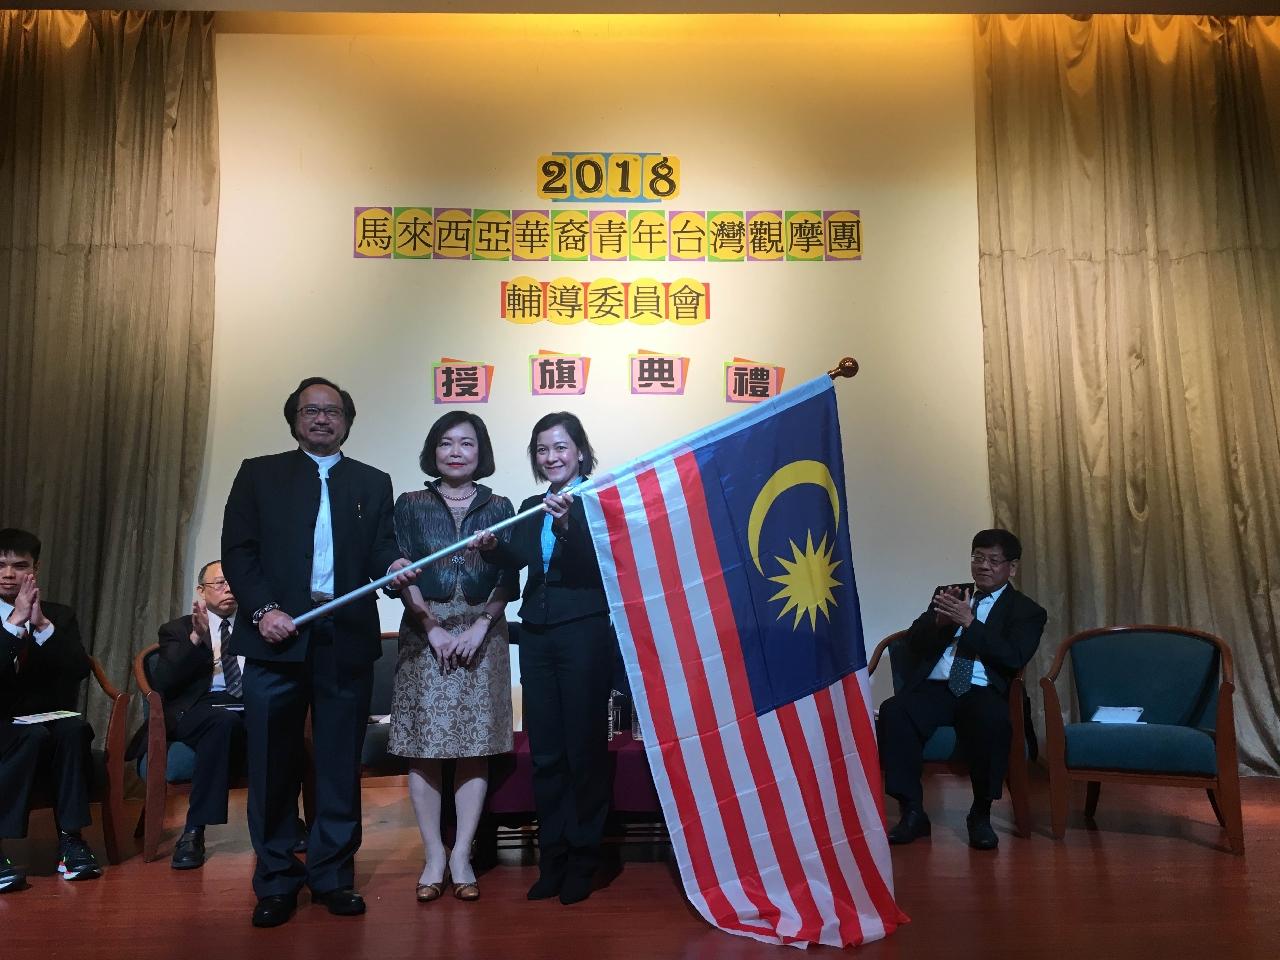 Representative Anne Hung (center) winesses the “Flag Presentation Ceremony of the Malaysia Youth Taiwan Study Tour 2018”.
